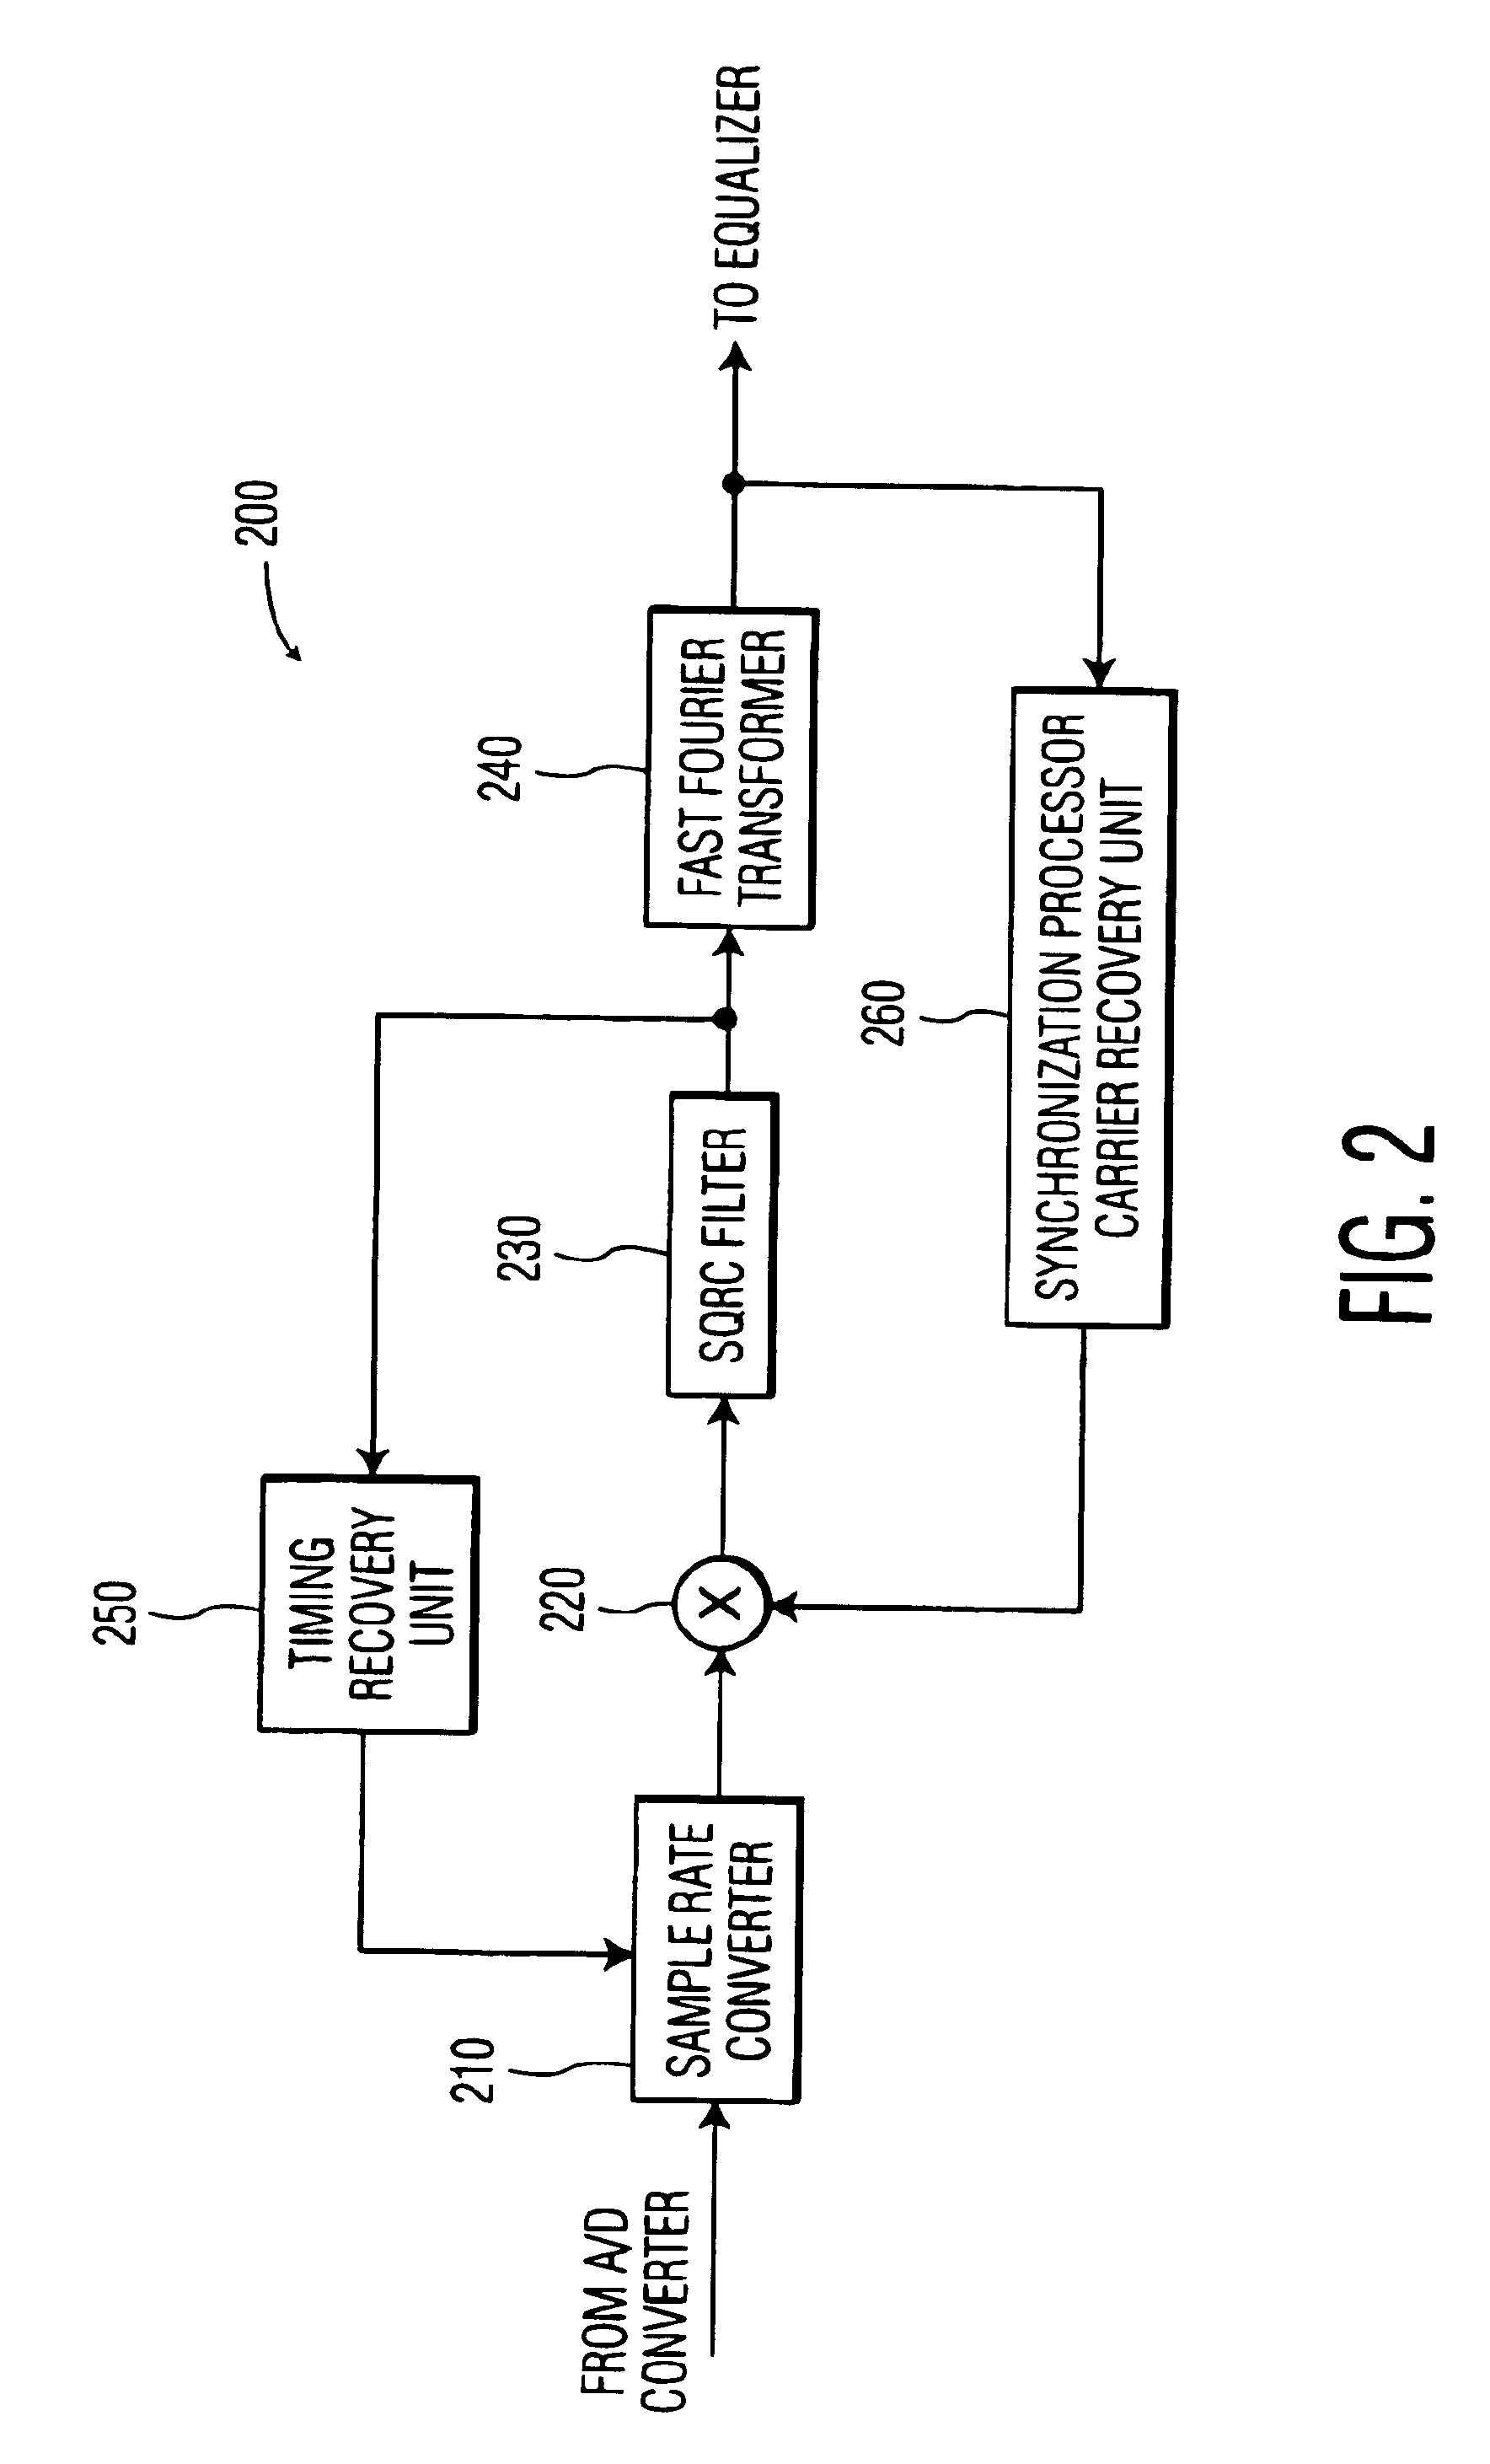 System and method for providing frequency domain synchronization for single carrier signals